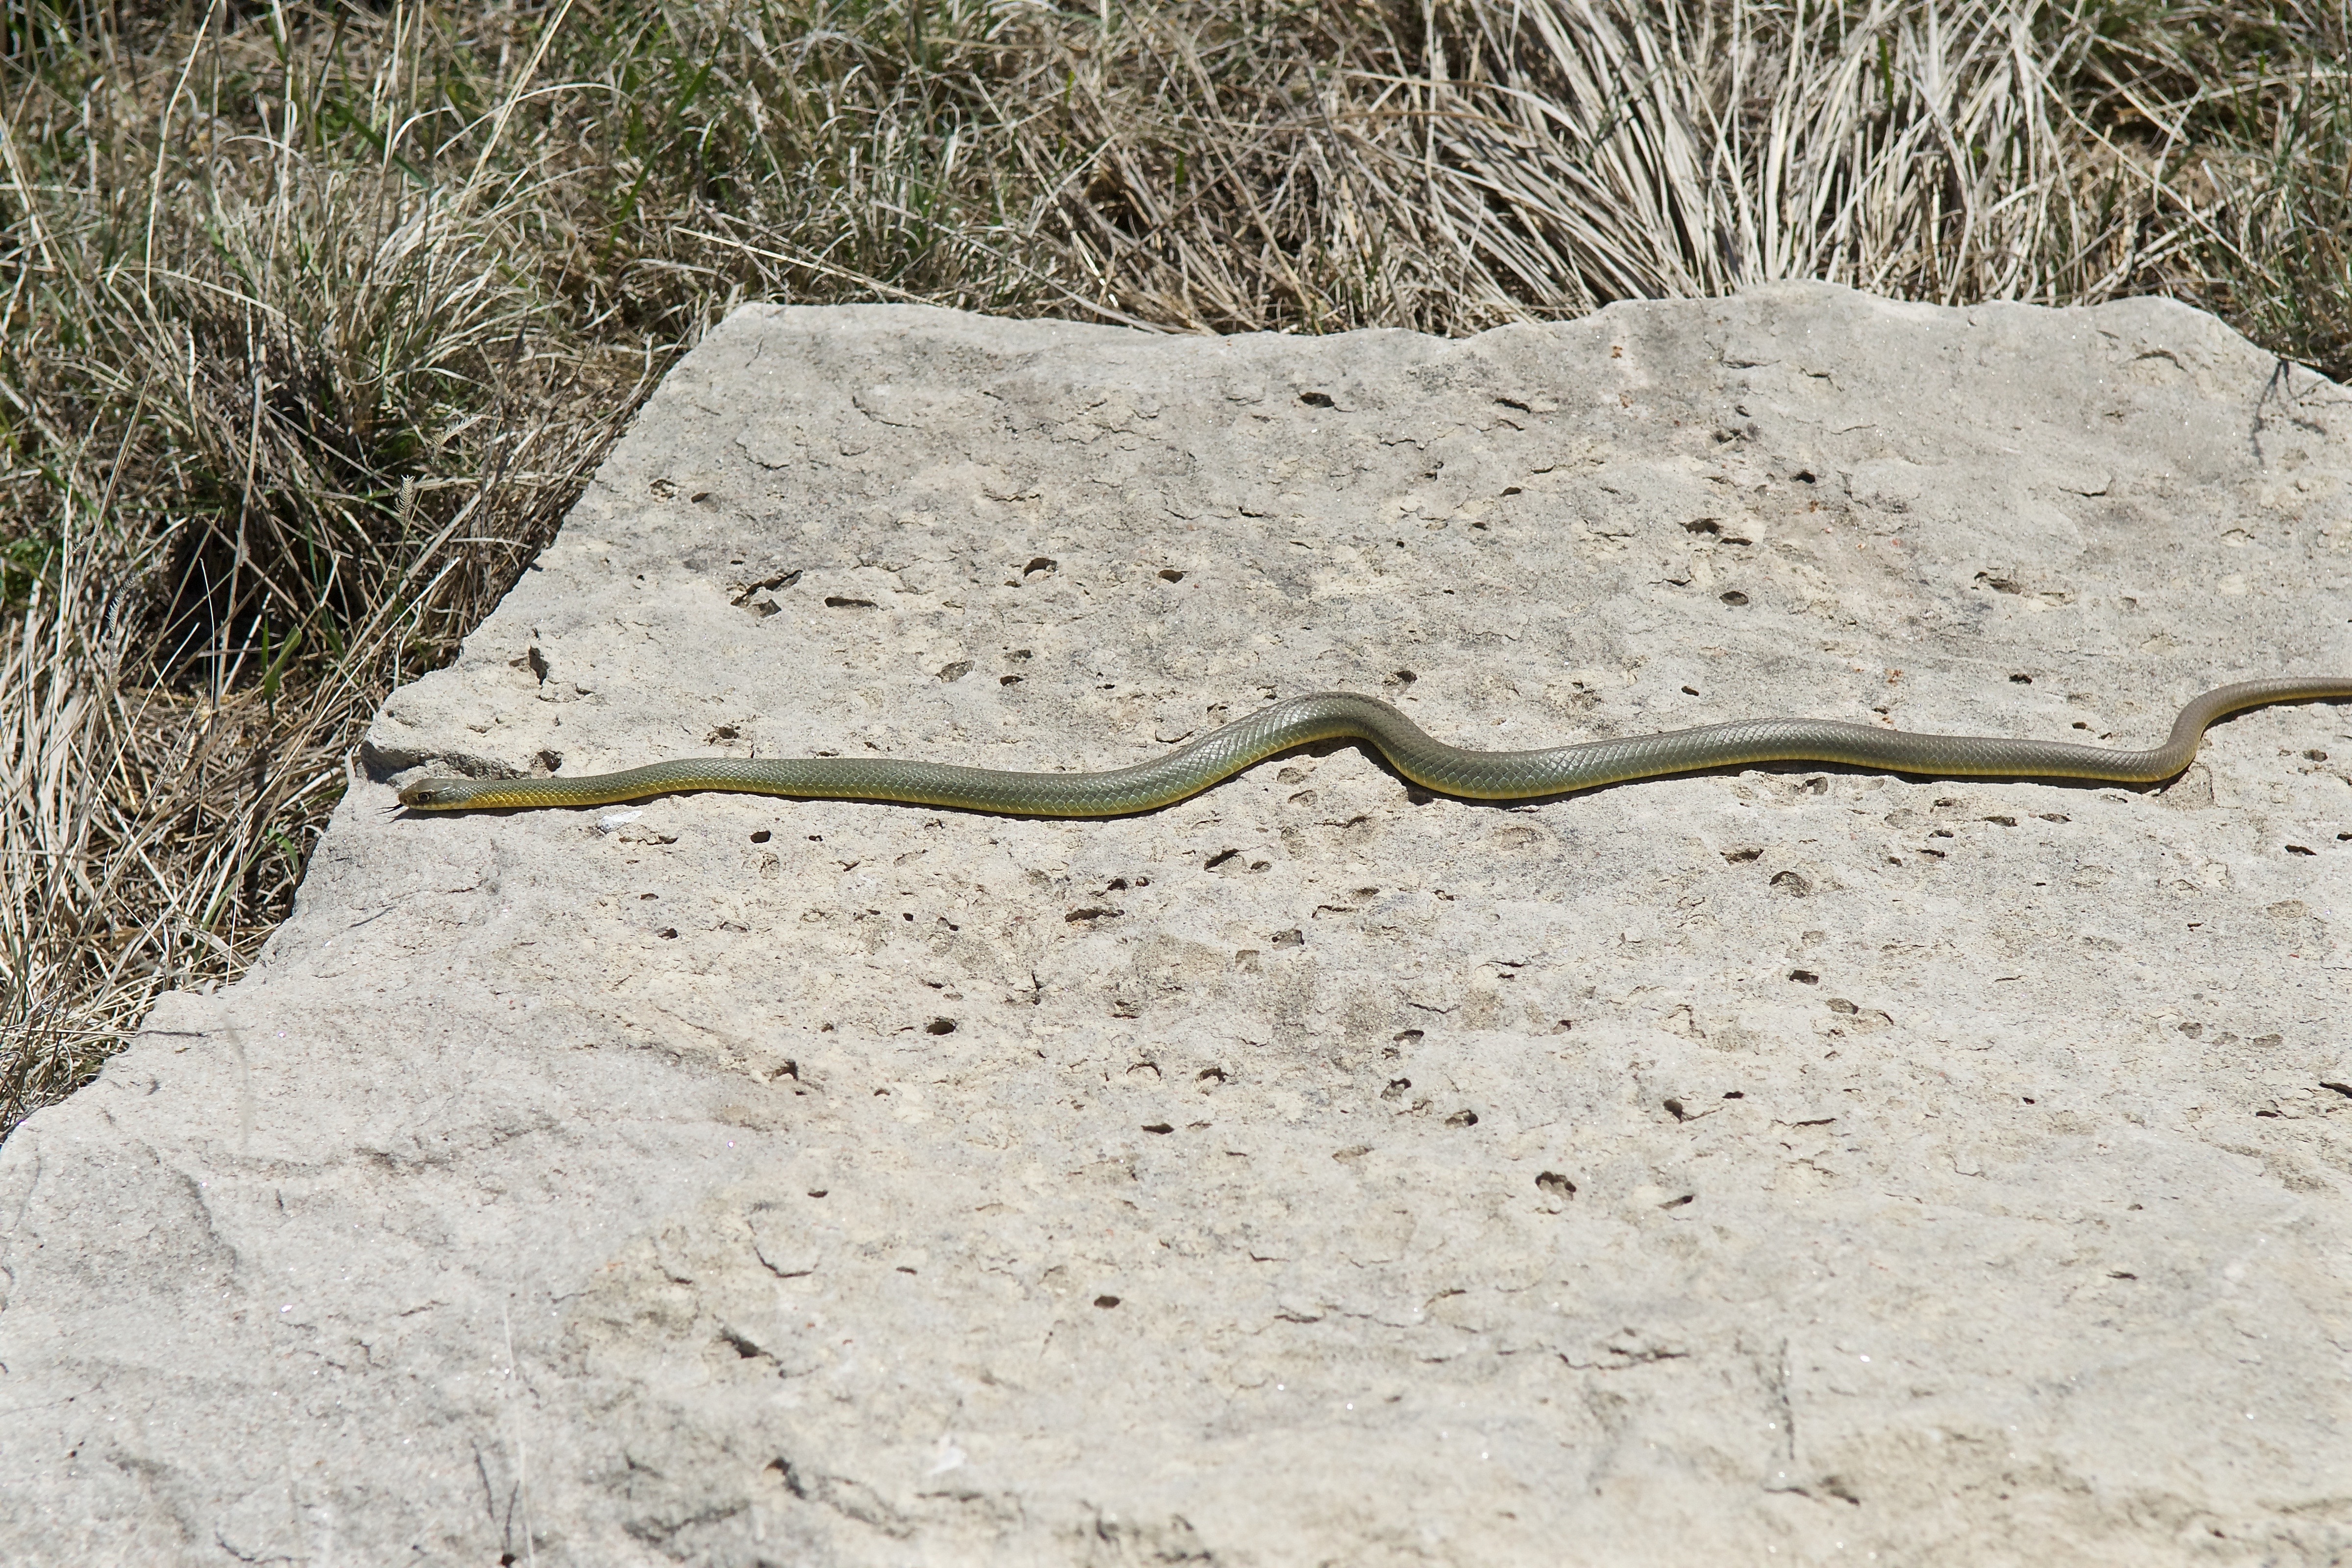 Yellow-Bellied Racer